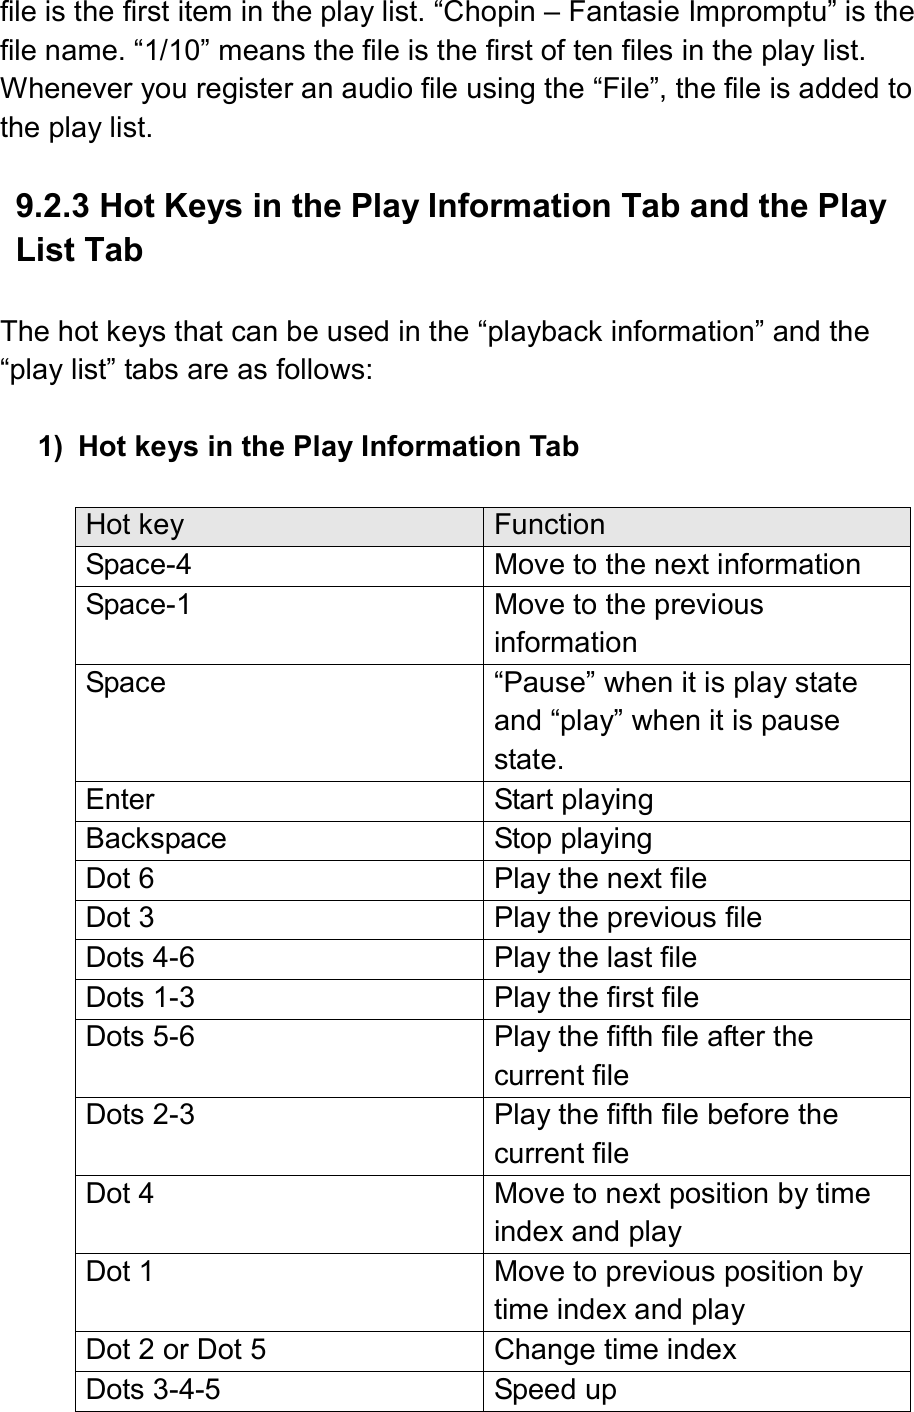  file is the first item in the play list. “Chopin – Fantasie Impromptu” is the file name. “1/10” means the file is the first of ten files in the play list. Whenever you register an audio file using the “File”, the file is added to the play list.  9.2.3 Hot Keys in the Play Information Tab and the Play List Tab  The hot keys that can be used in the “playback information” and the “play list” tabs are as follows:  1)  Hot keys in the Play Information Tab  Hot key  Function Space-4  Move to the next information Space-1  Move to the previous information Space  “Pause” when it is play state and “play” when it is pause state. Enter  Start playing Backspace  Stop playing Dot 6  Play the next file Dot 3  Play the previous file Dots 4-6  Play the last file Dots 1-3  Play the first file Dots 5-6  Play the fifth file after the current file Dots 2-3  Play the fifth file before the current file Dot 4  Move to next position by time index and play Dot 1  Move to previous position by time index and play Dot 2 or Dot 5  Change time index Dots 3-4-5  Speed up 